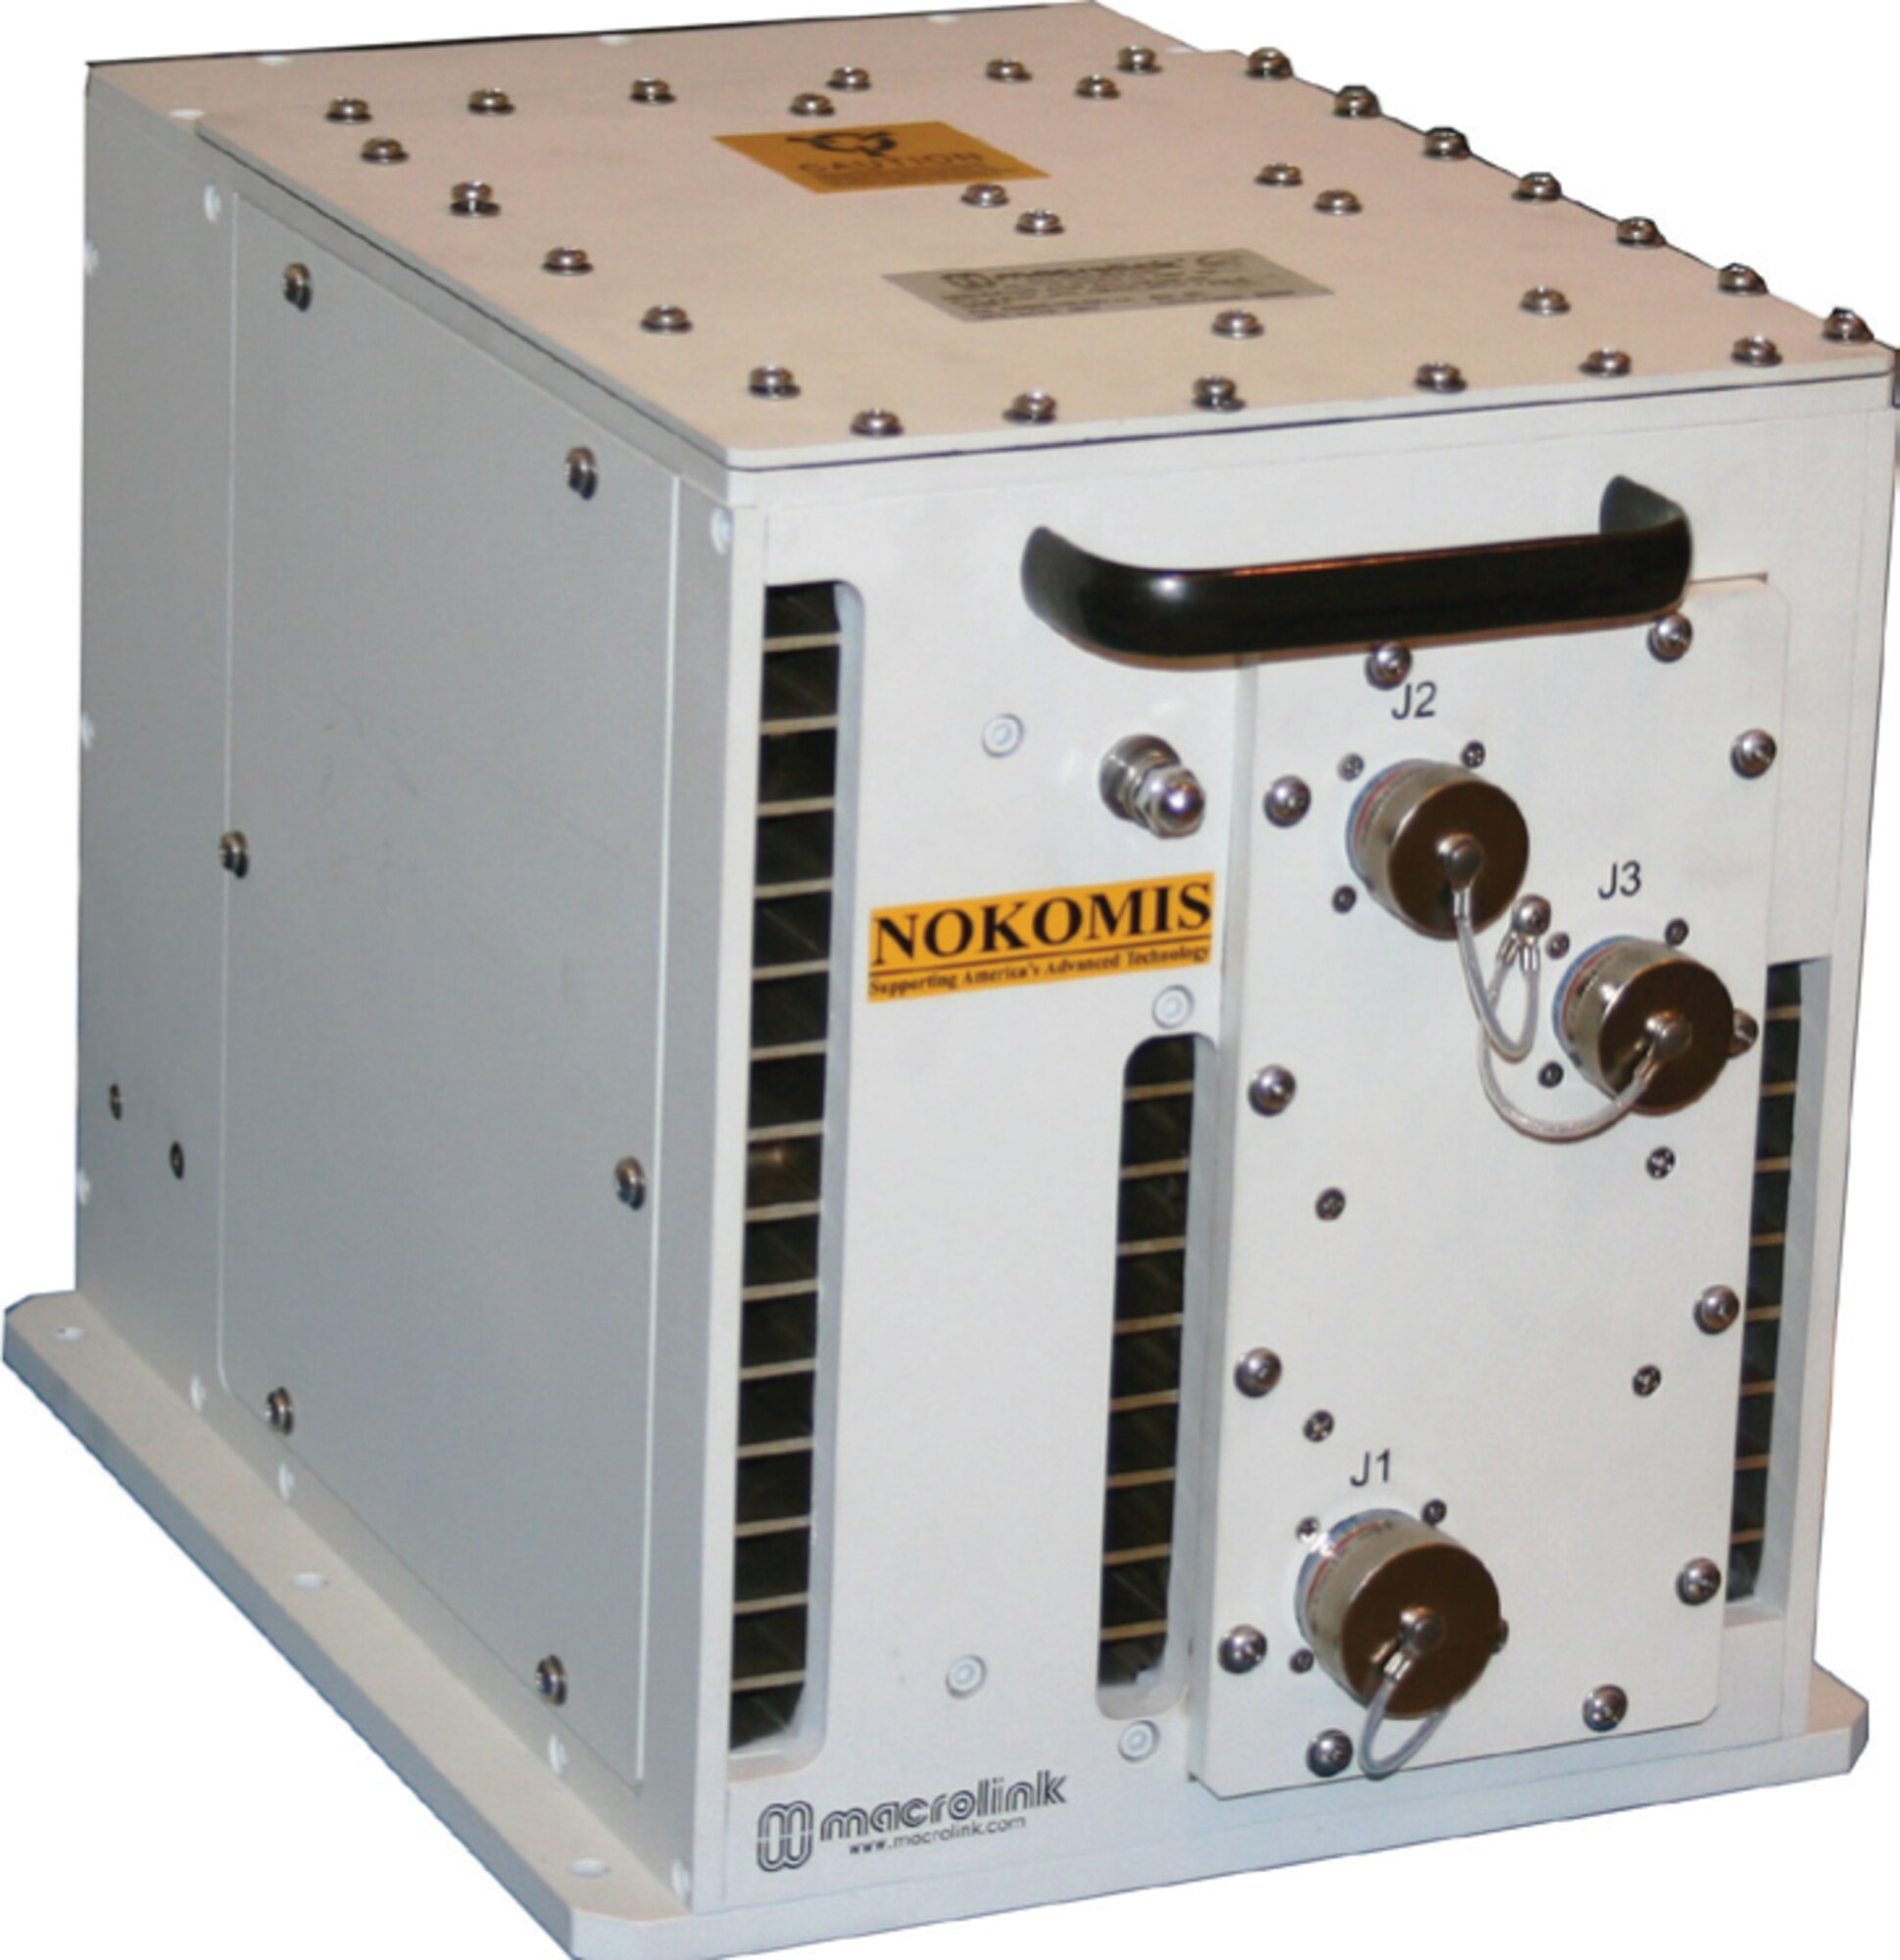 With Small Business Innovation Research funding, Nokomis, Inc., developed a RADICAL, Remote-Controlled Improvised Explosive Device Detection Identification and Classification Algorithms, system to mitigate improvised explosive device threats for deployed troops. (AFRL image)